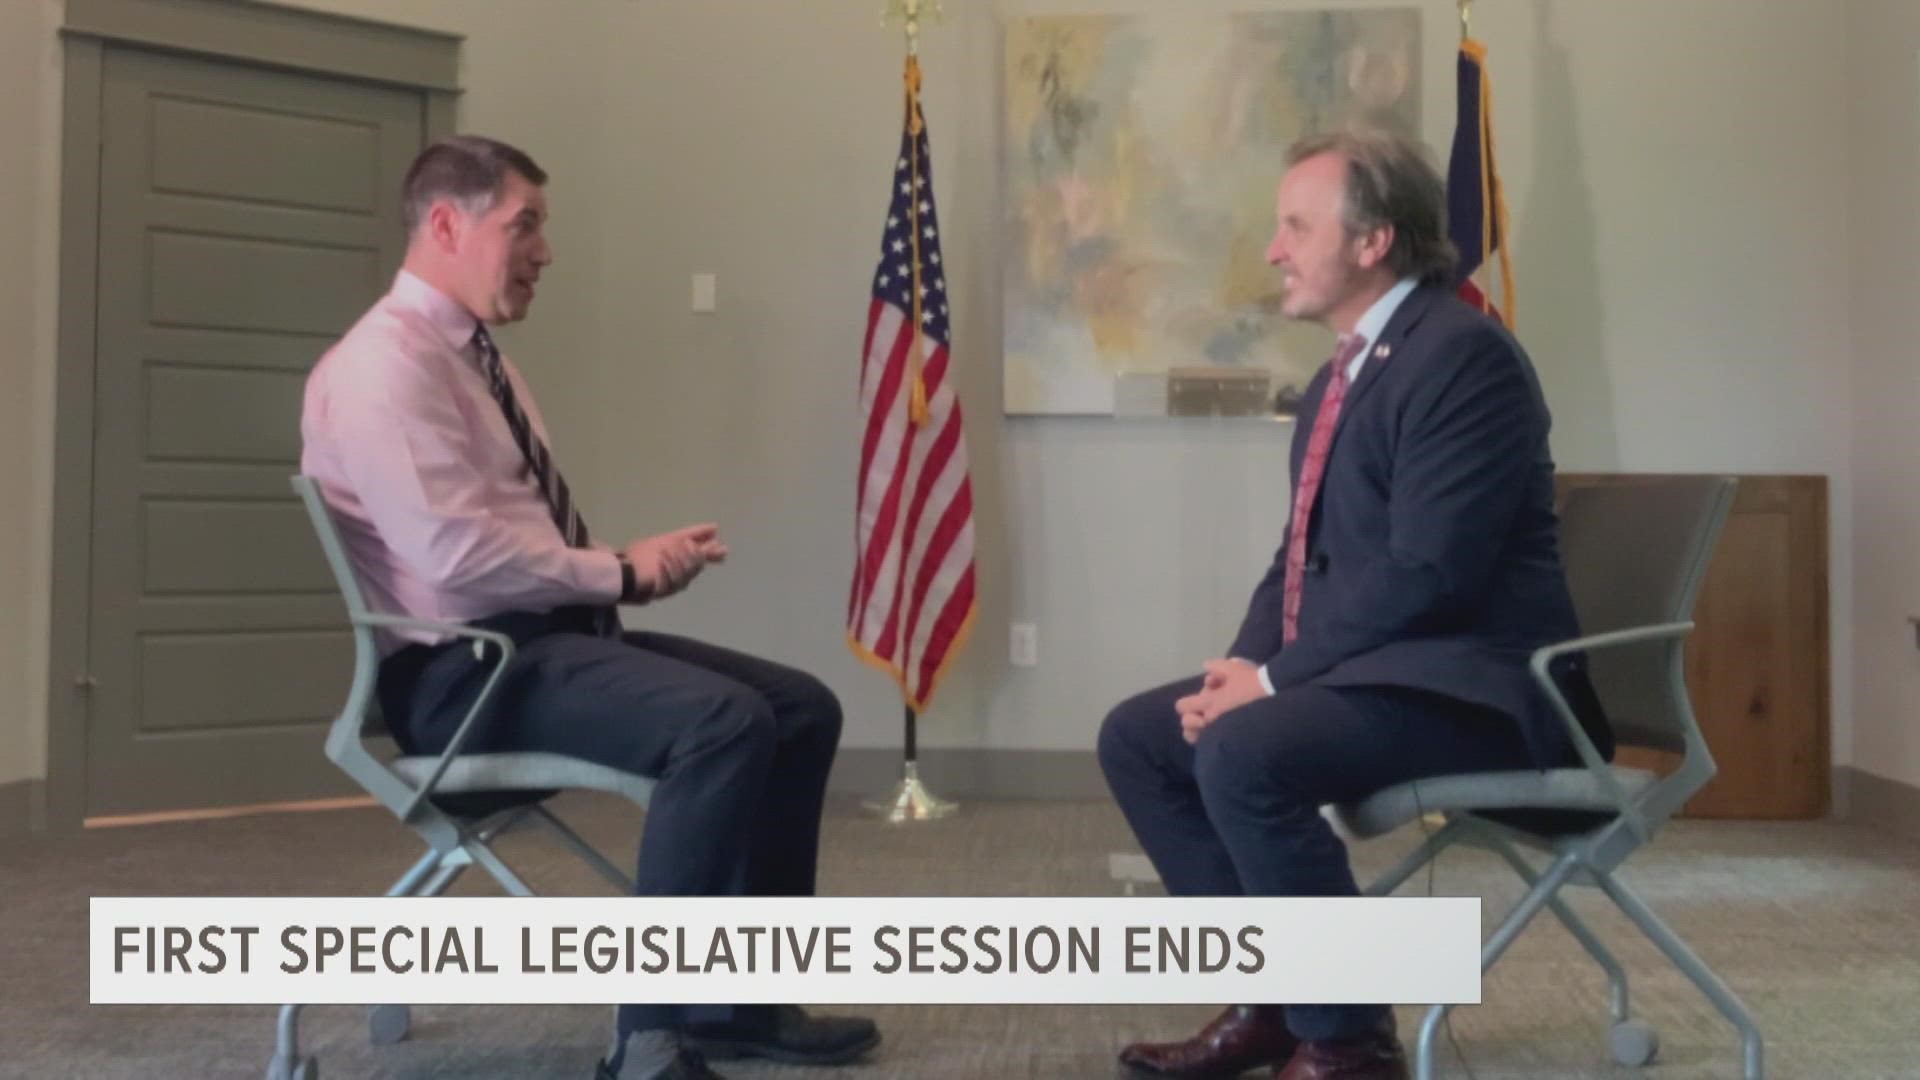 Sen. Hughes (R-Mineola) talks about how his election bill fits into the second special legislative session, the "heartbeat bill" he got passed into law, and more